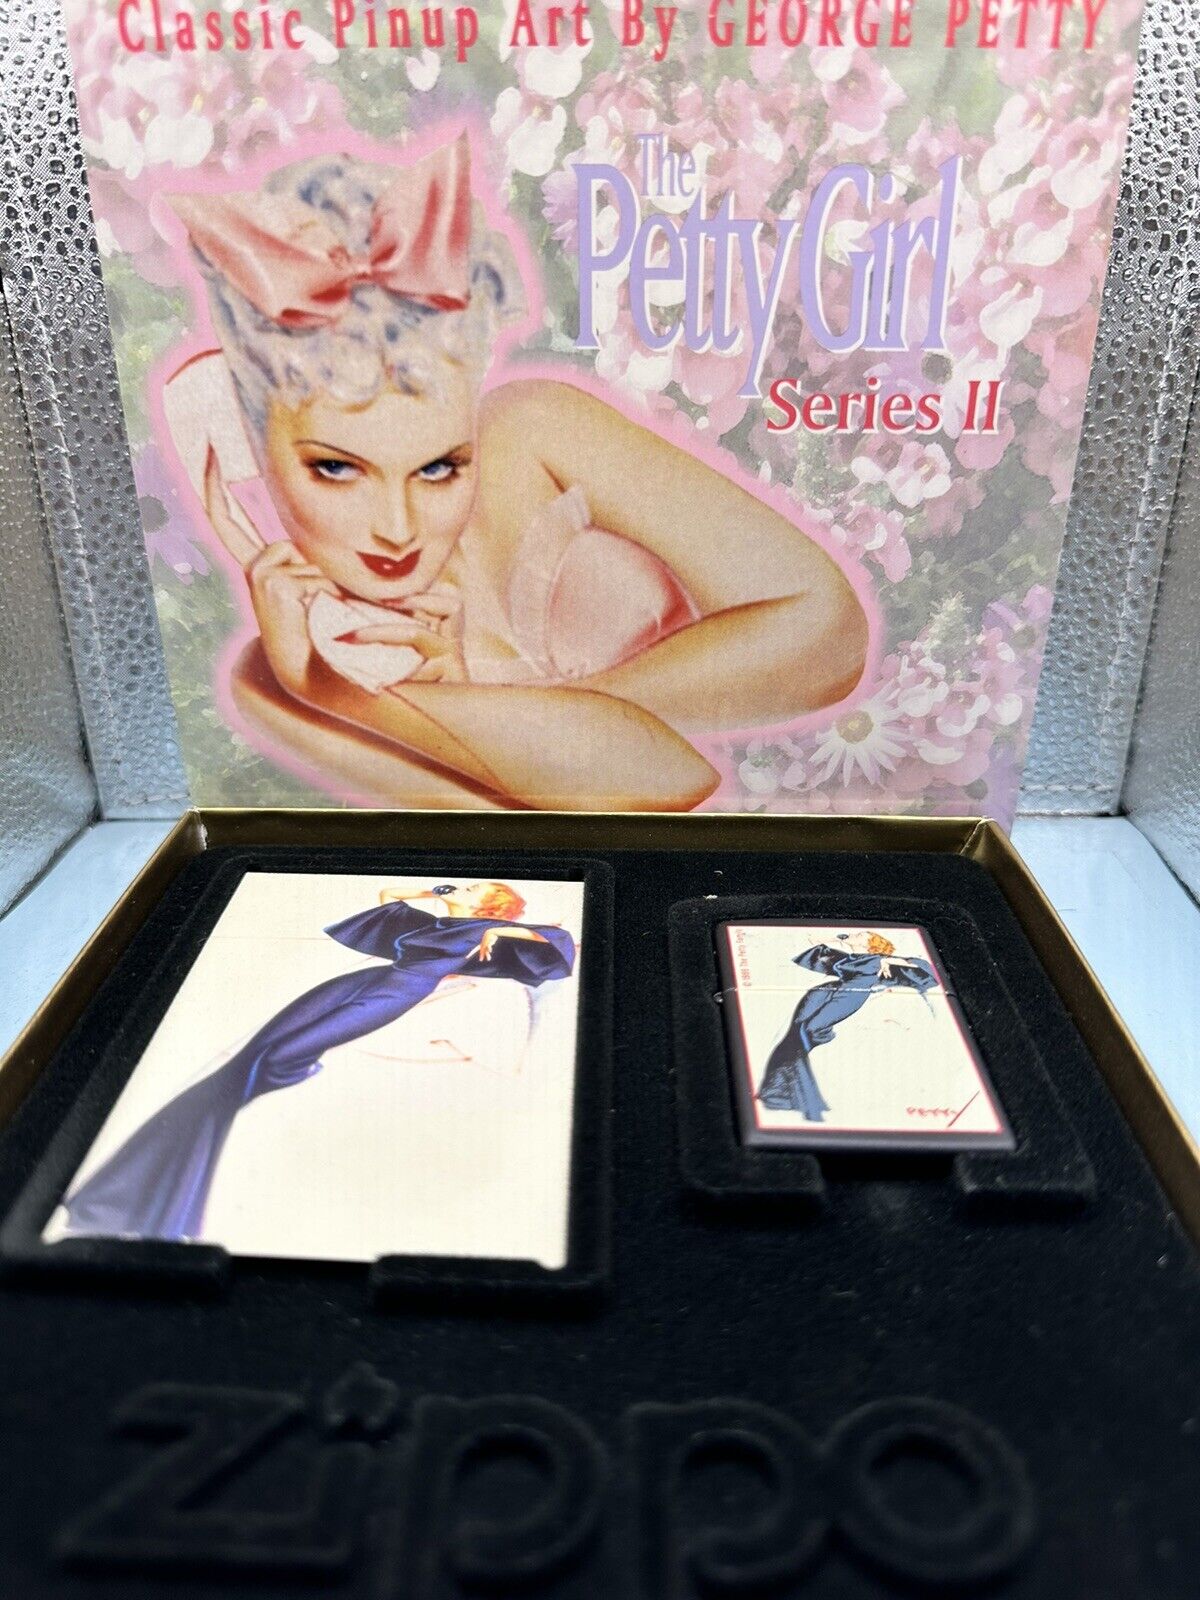 Limited Edition Vintage 1999 Satin Doll Petty PinUp Girl Zippo Lighter